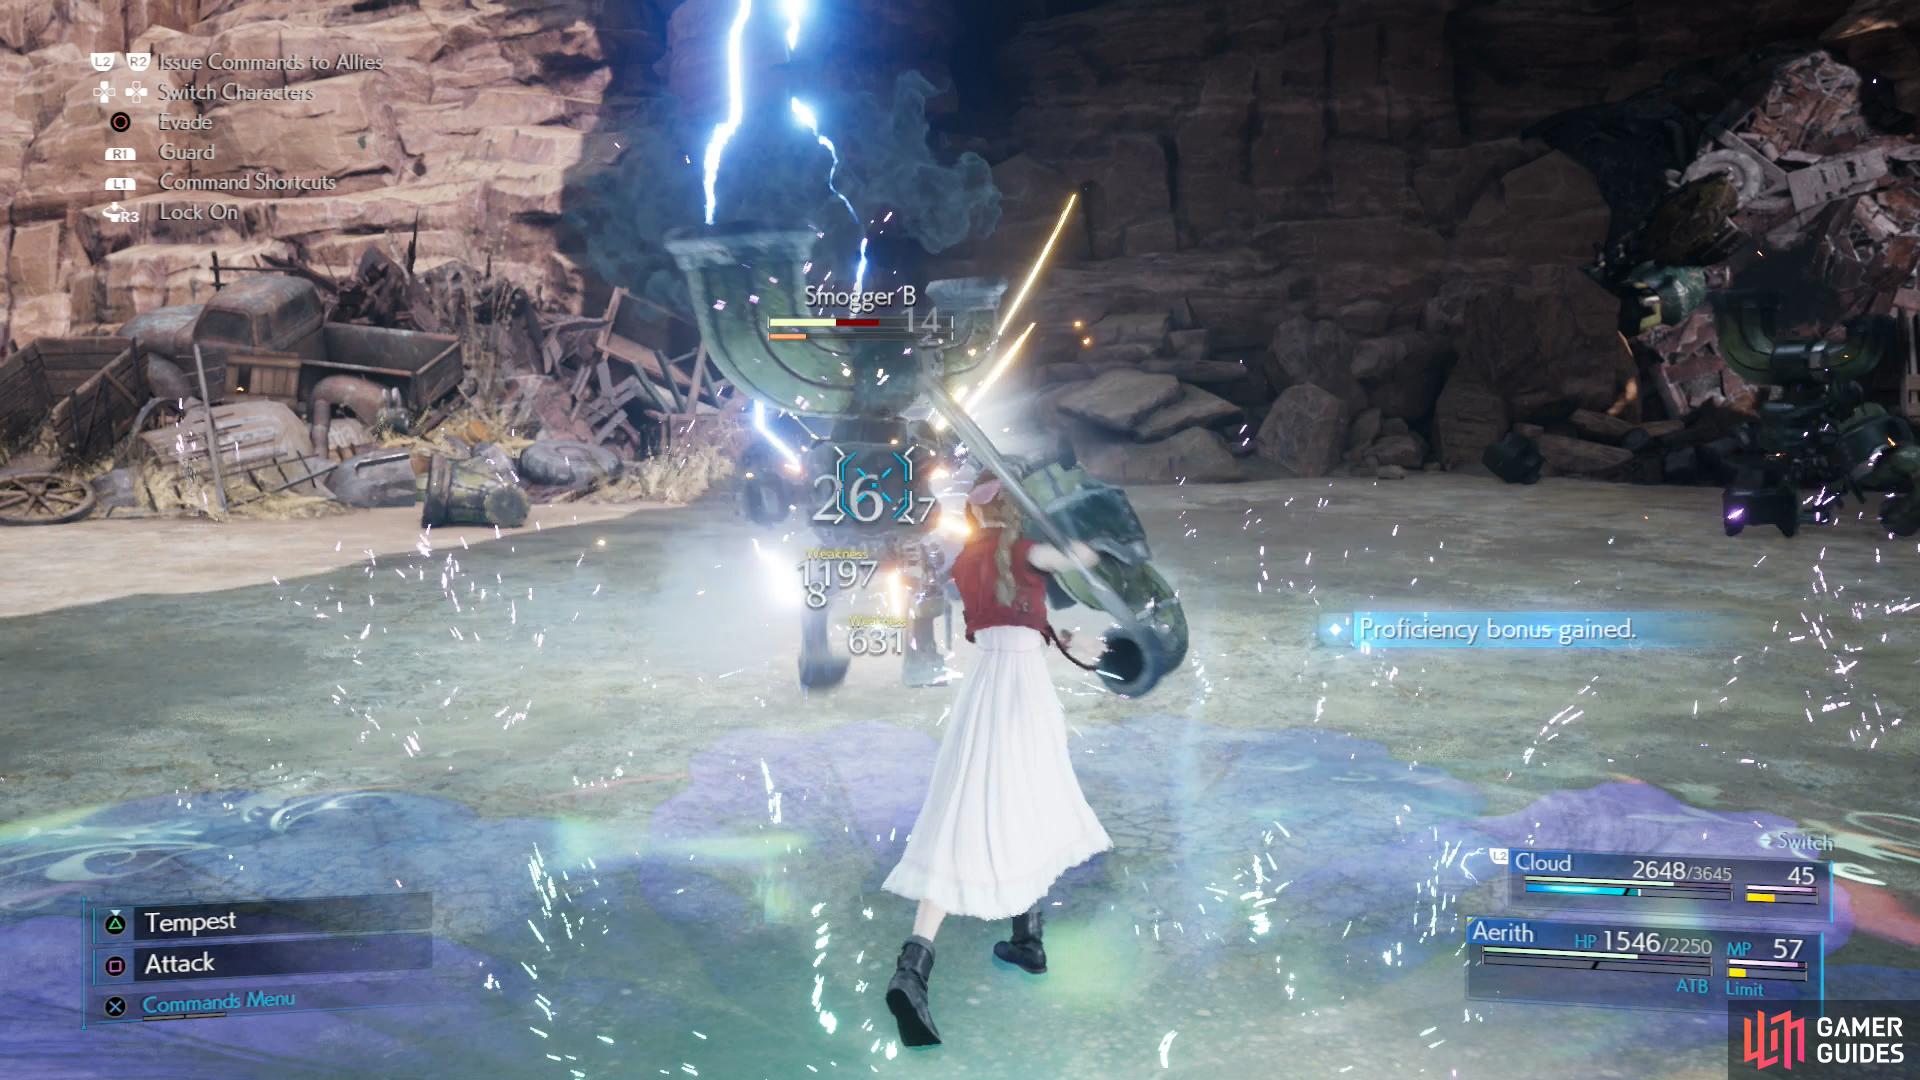 Aerith's Arcane Ward can allow her to blast away enemies quickly.